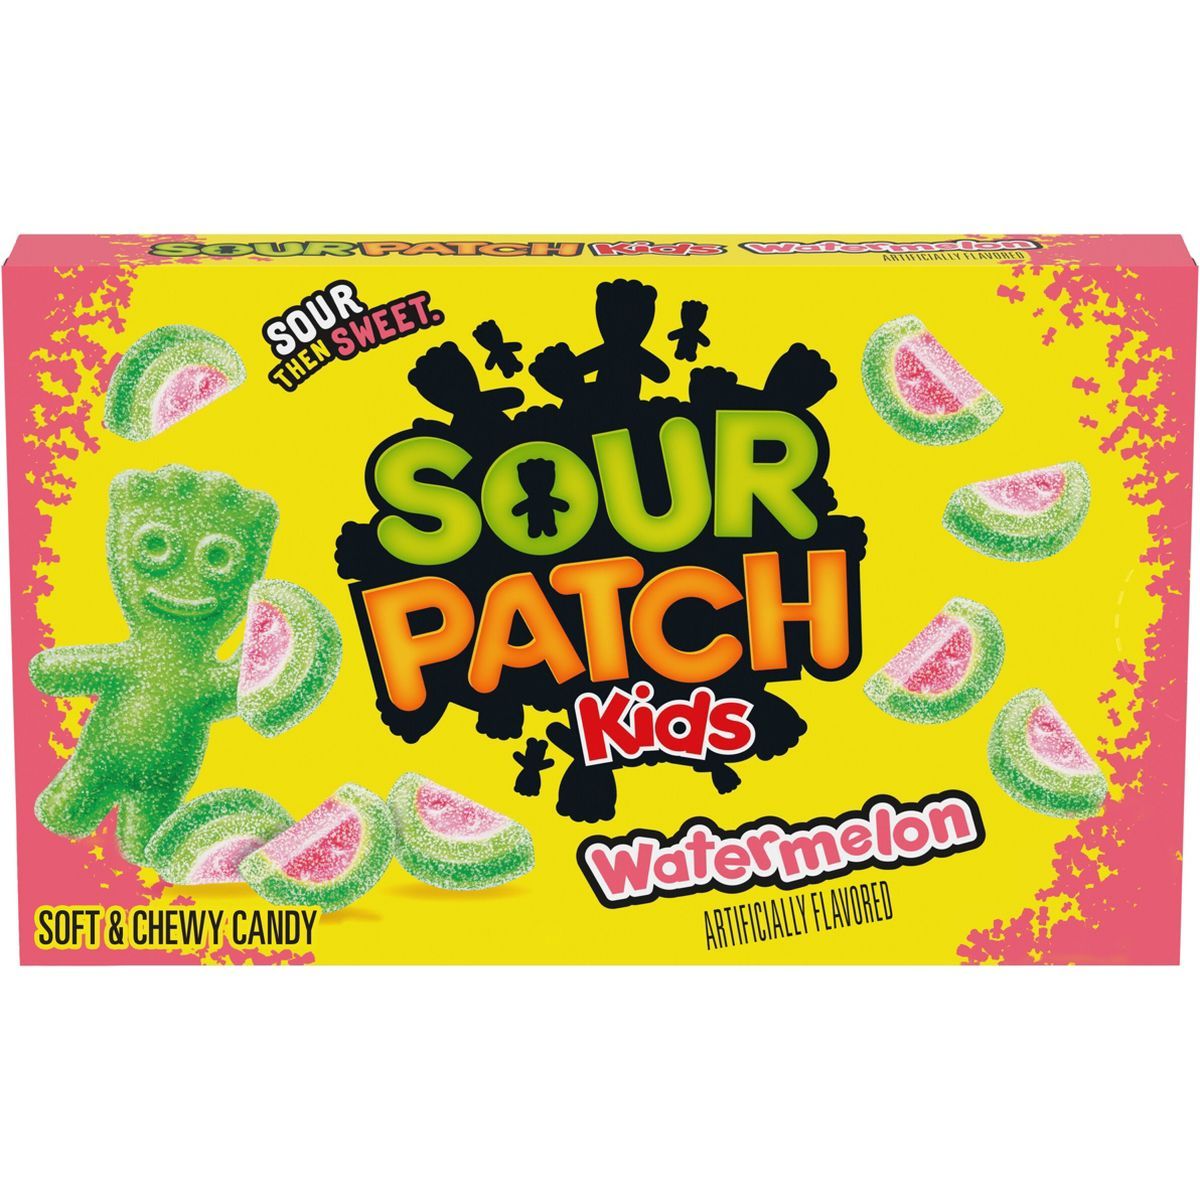 Sour Patch Kids Watermelon Soft & Chewy Candy - 3.5oz | Target